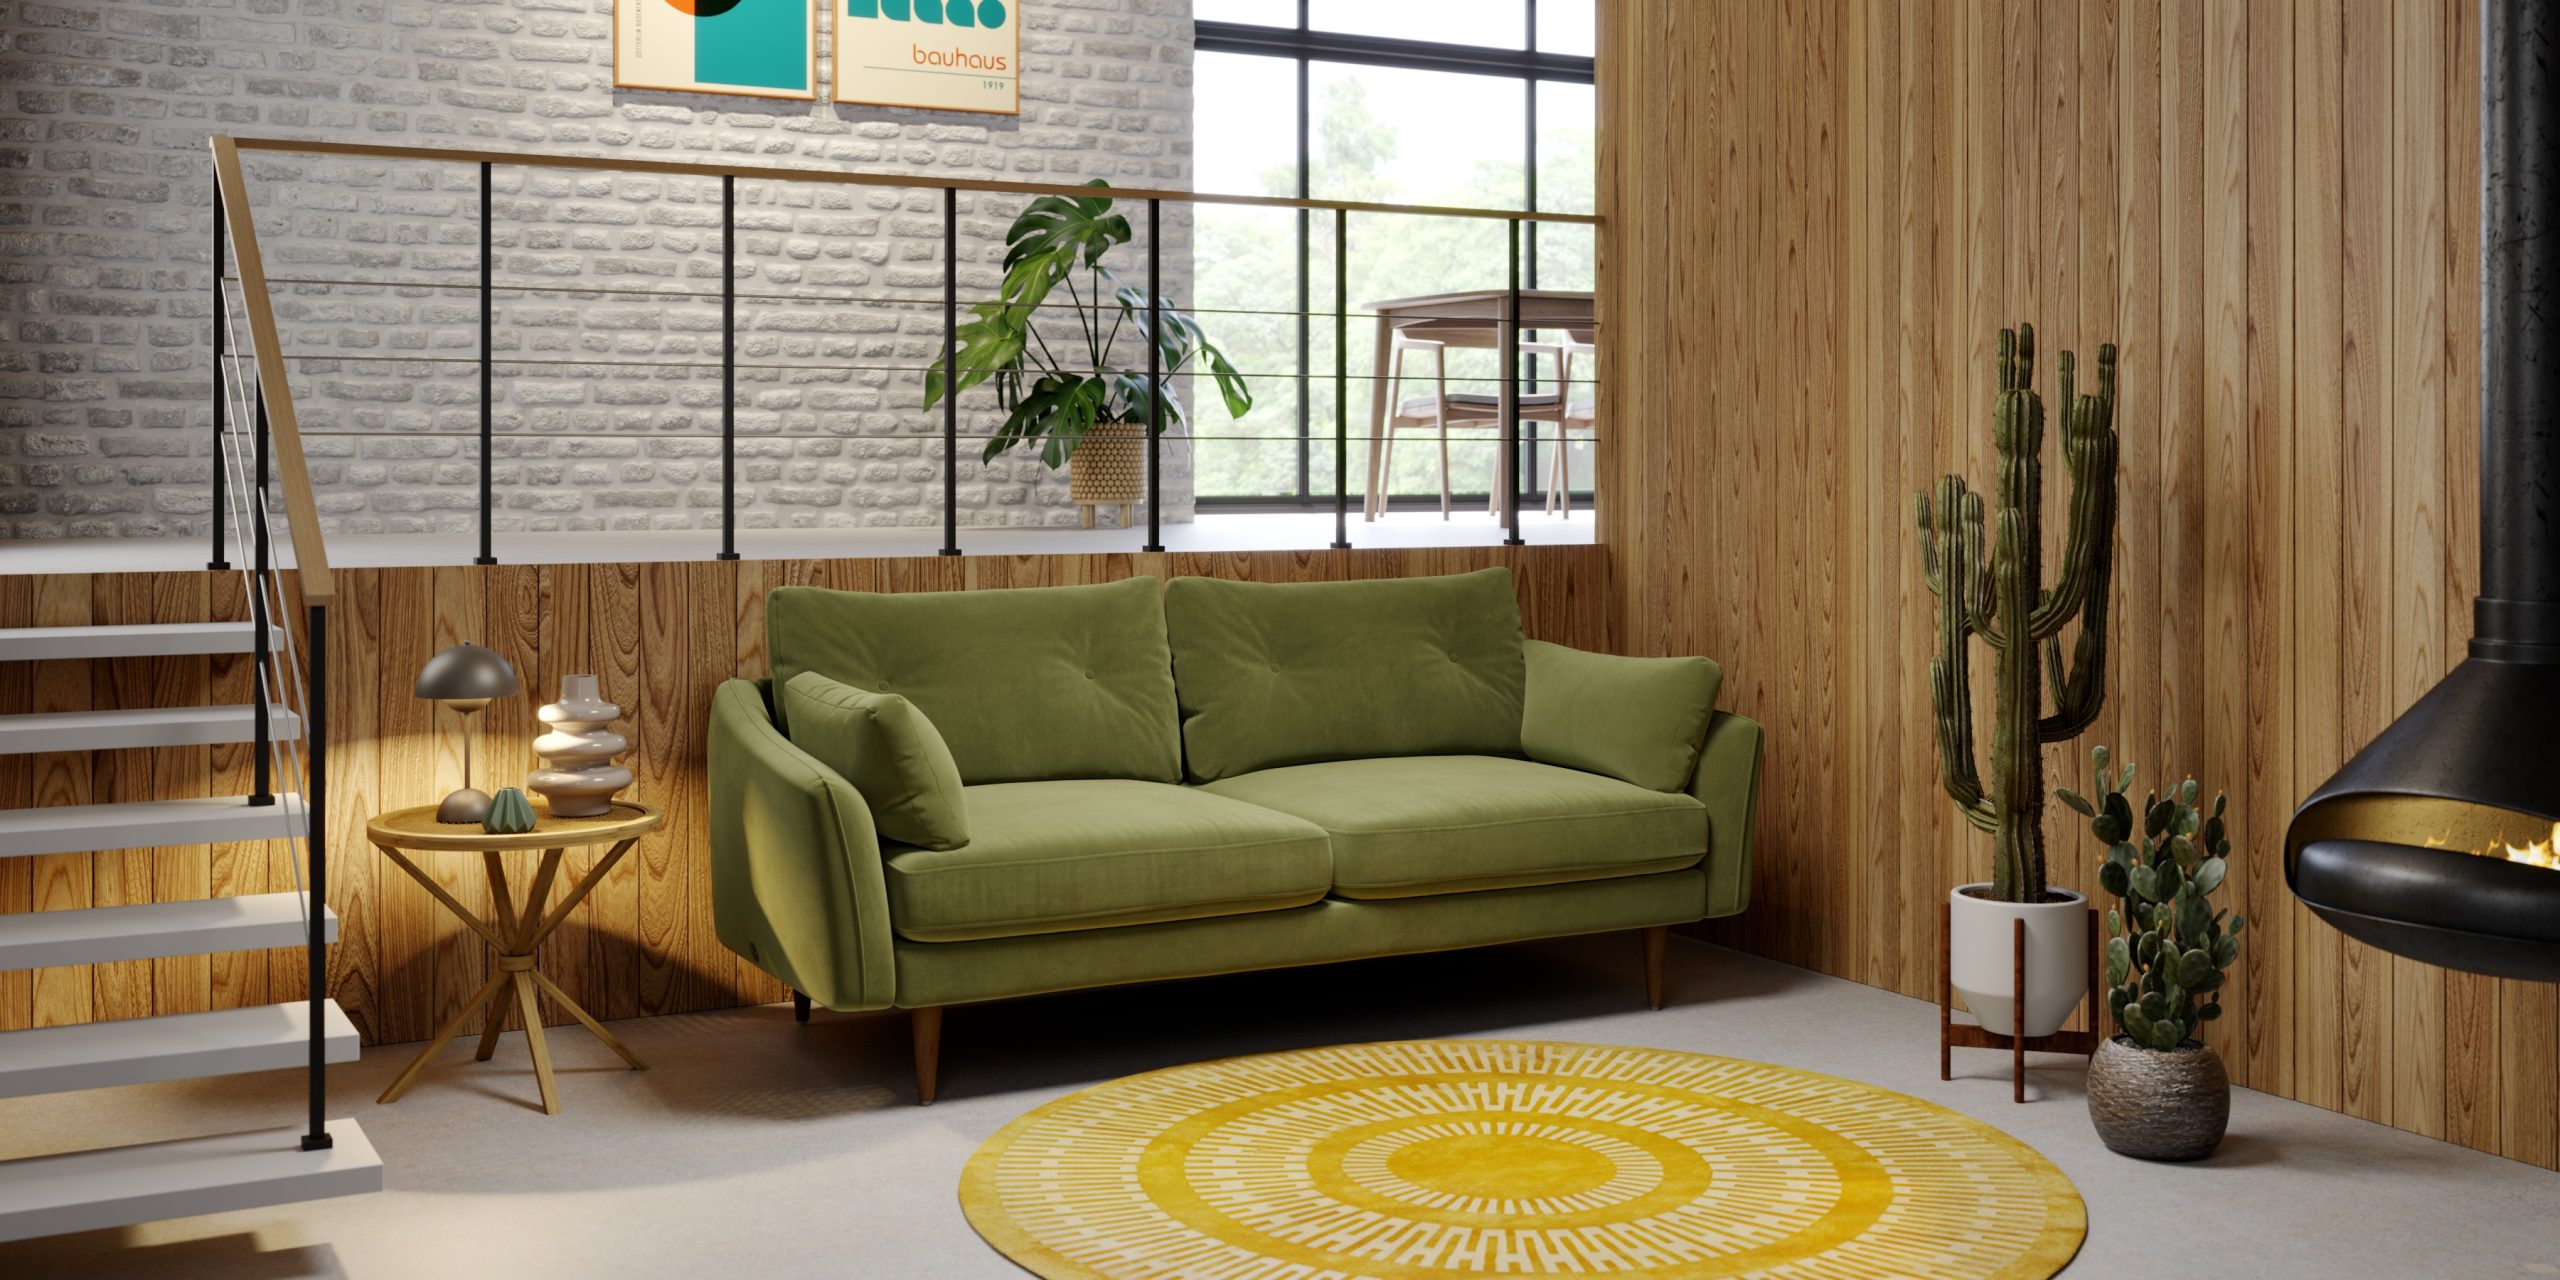 Living room with olive green sofa, yellow rug and wooden details